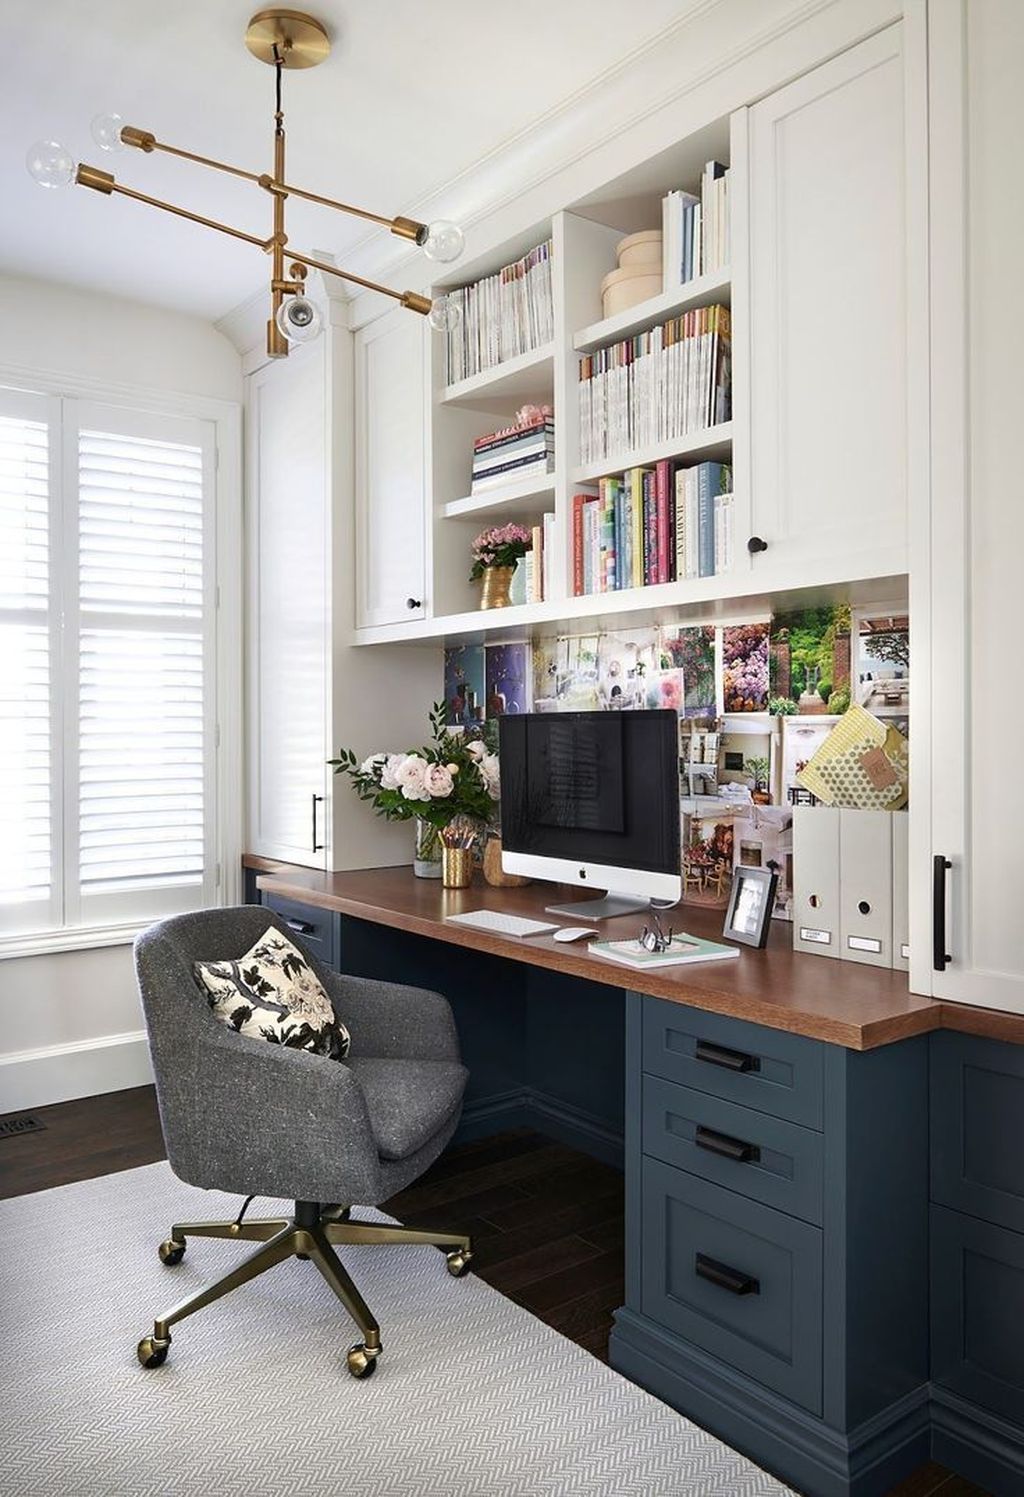 Top 15 Small Home Office Ideas For Productivity And Style